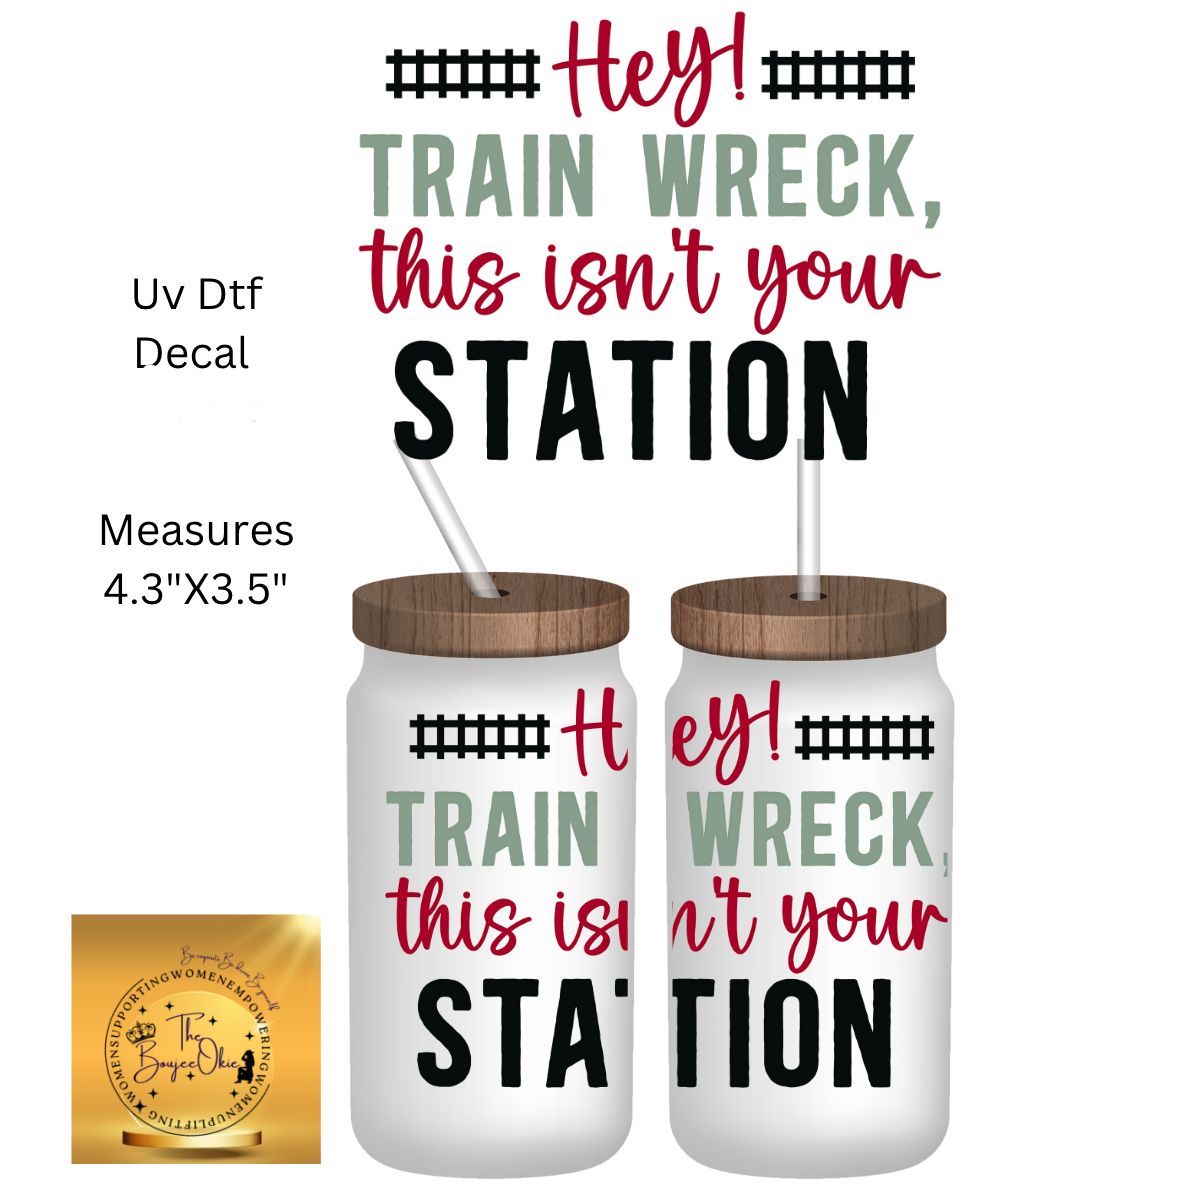 Uv Dtf Decal Hey Train Wreck This Isn't Your Station